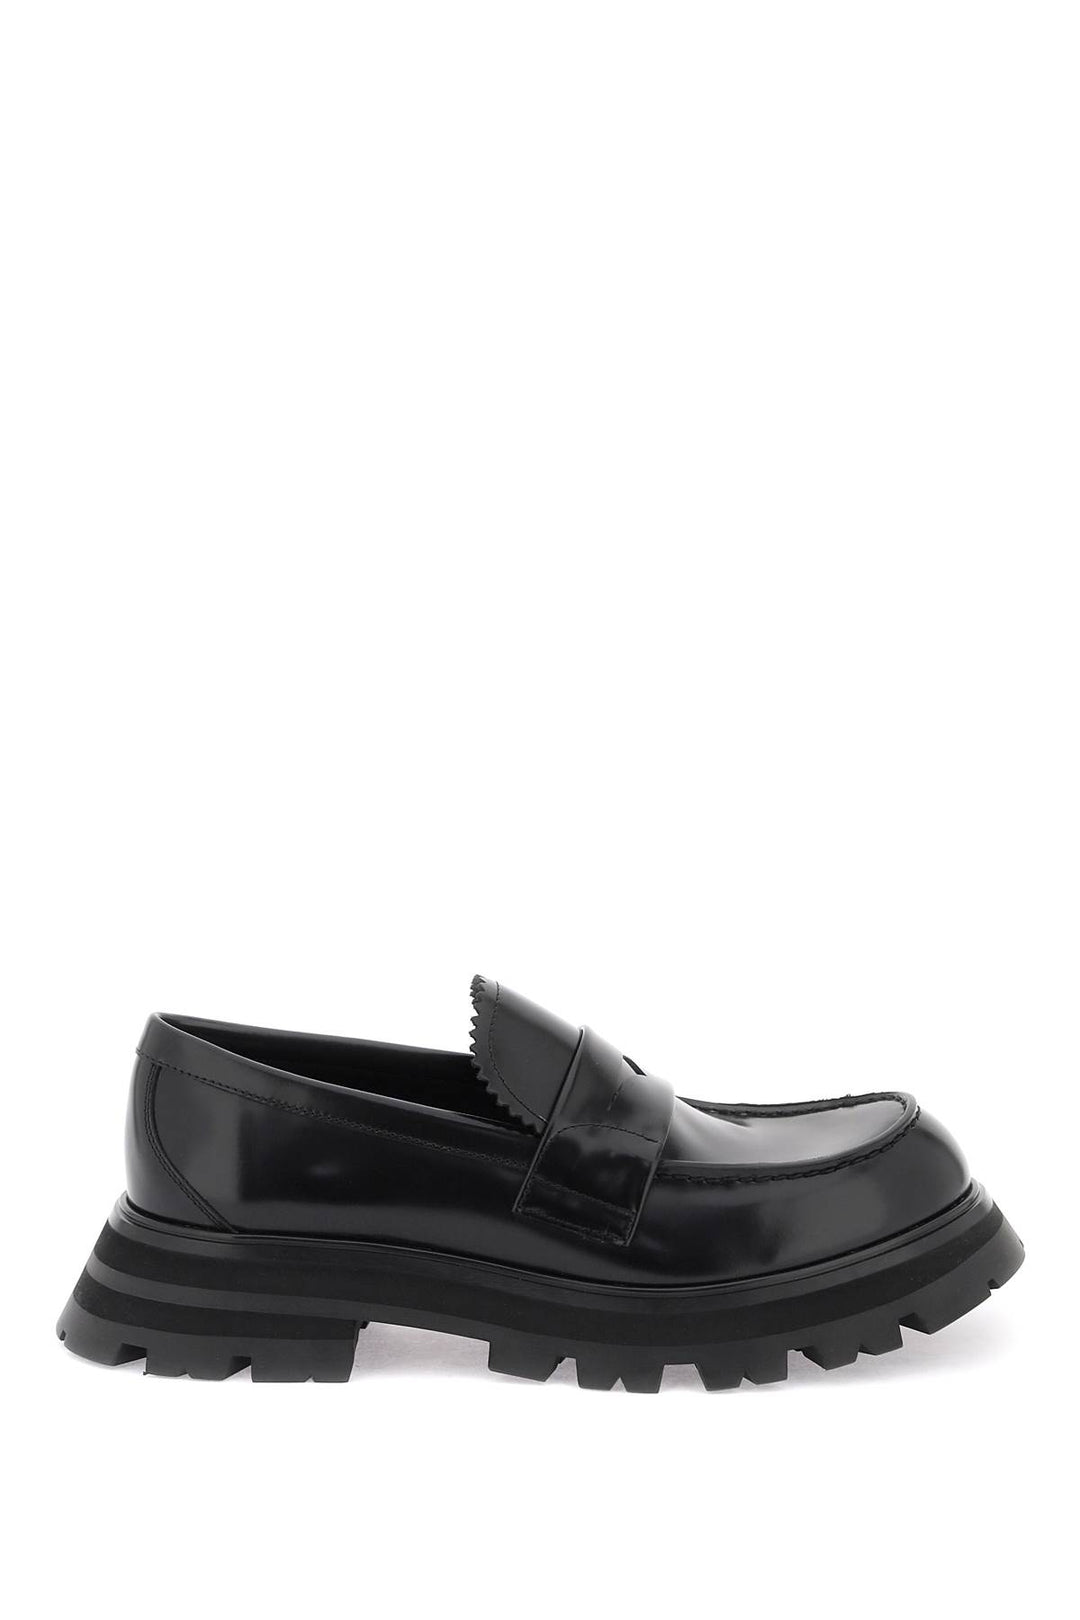 Alexander Mcqueen Brushed Leather Wander Loafers   Nero